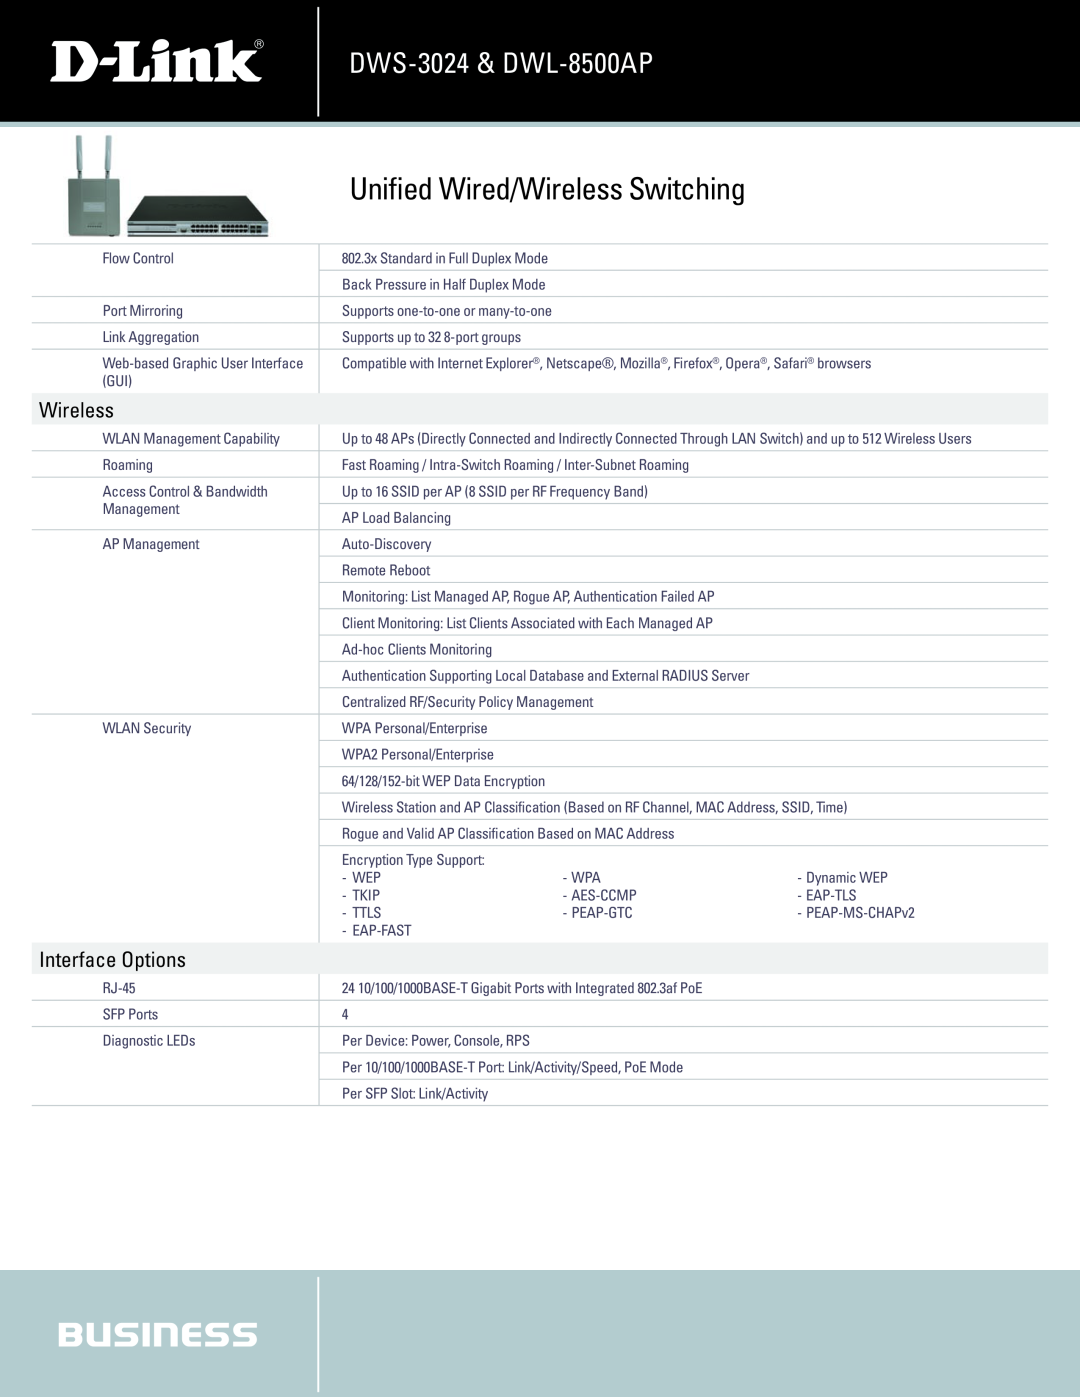 D-Link manual Interface Options, Unified Wired/Wireless Switching, DWS-3024 & DWL-8500AP 